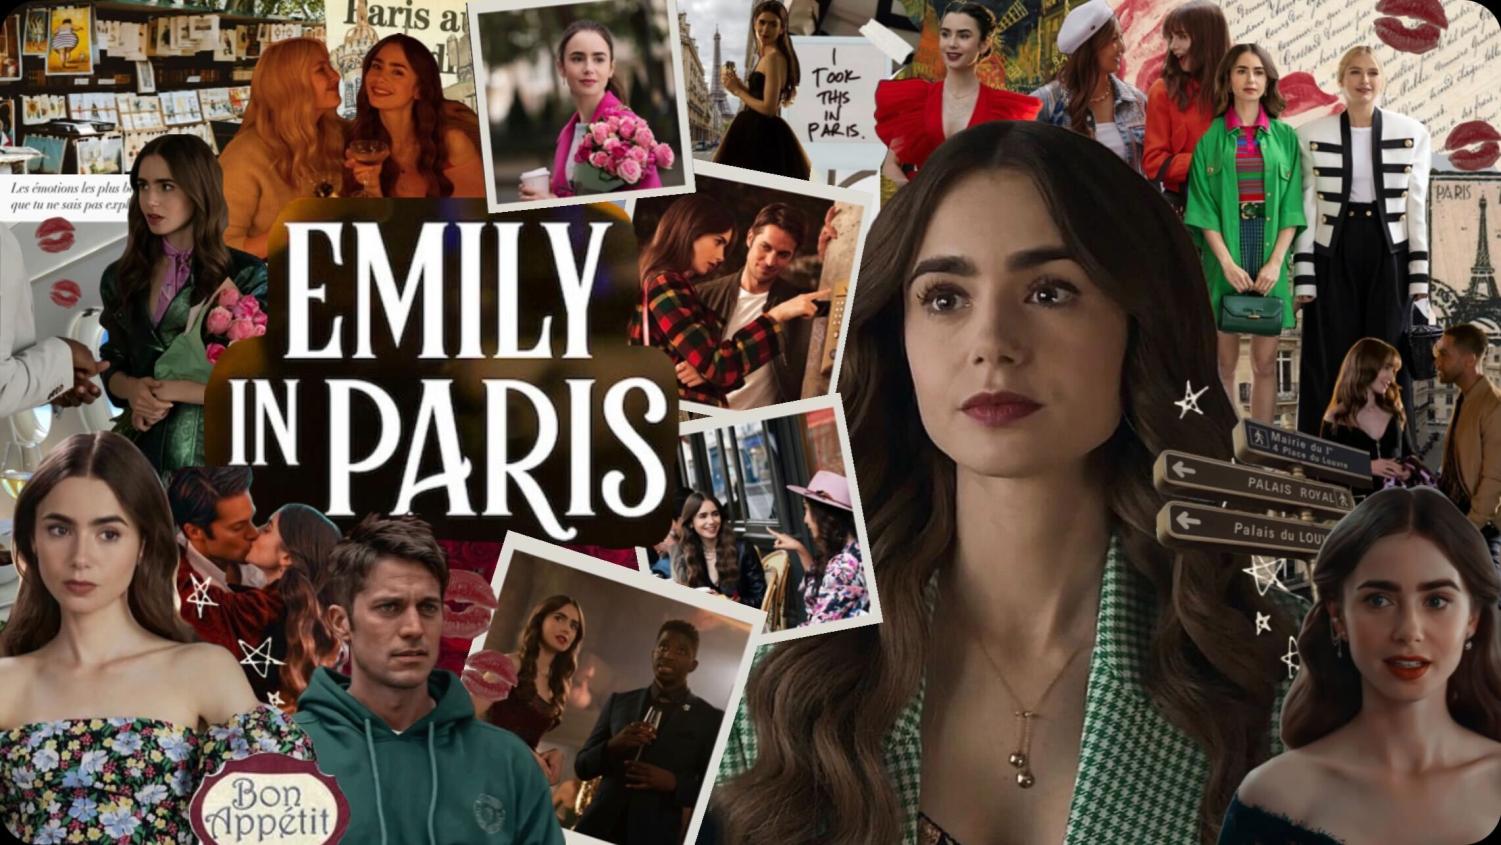 Netflix's 'Emily in Paris' embraces French life in new season